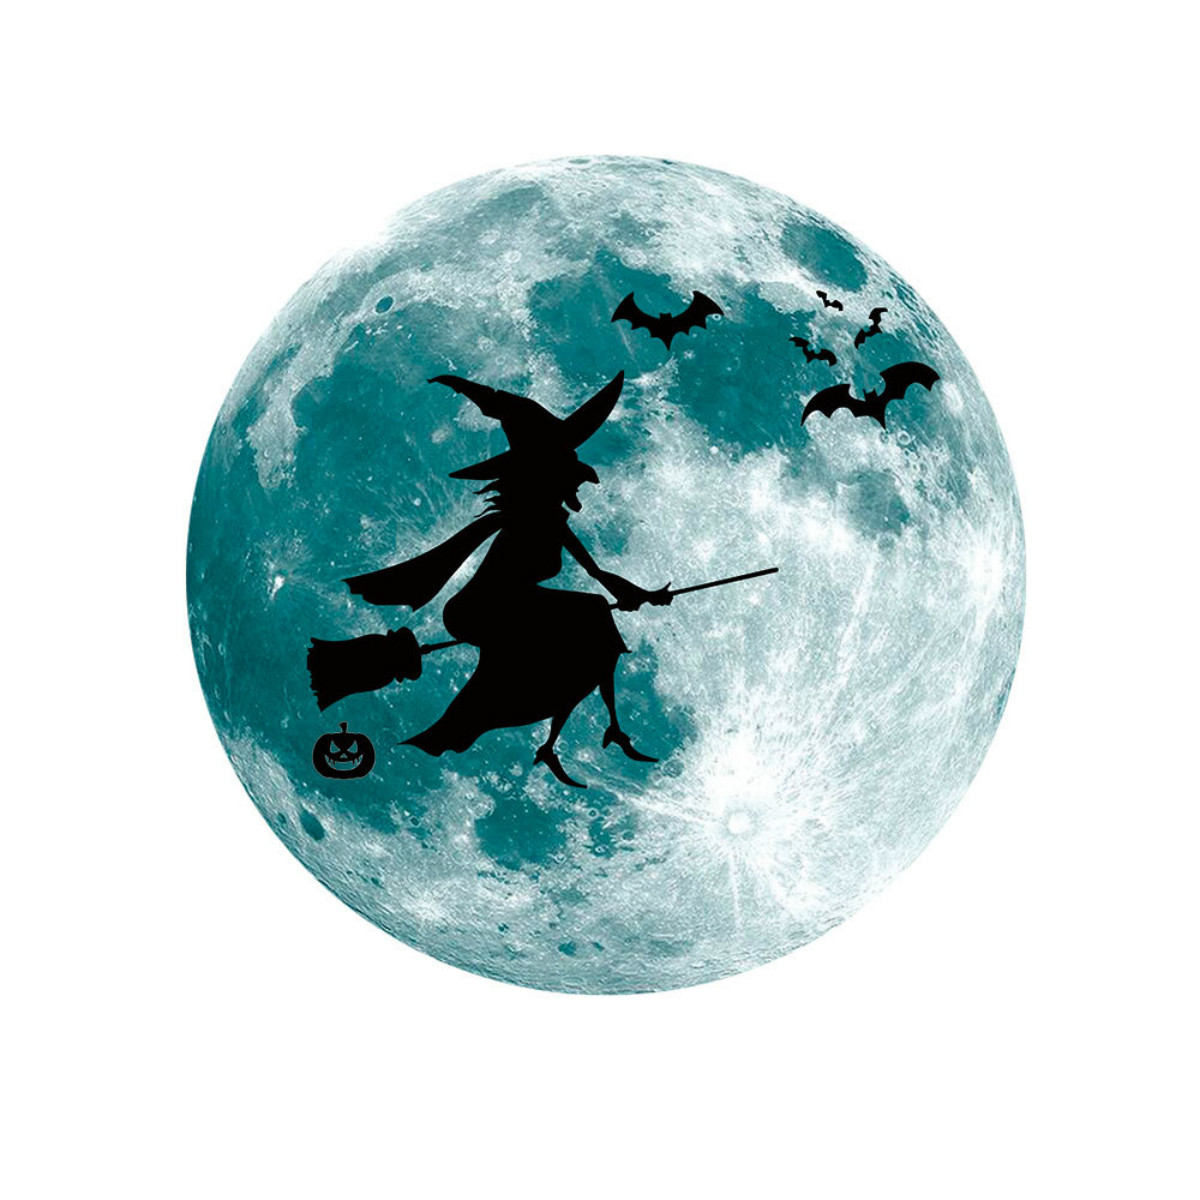 Halloween-Moon-Bat-Glow-In-Dark-Wall-Sticker-Luminous-Removable-Party-Room-Decorations-1585181-5